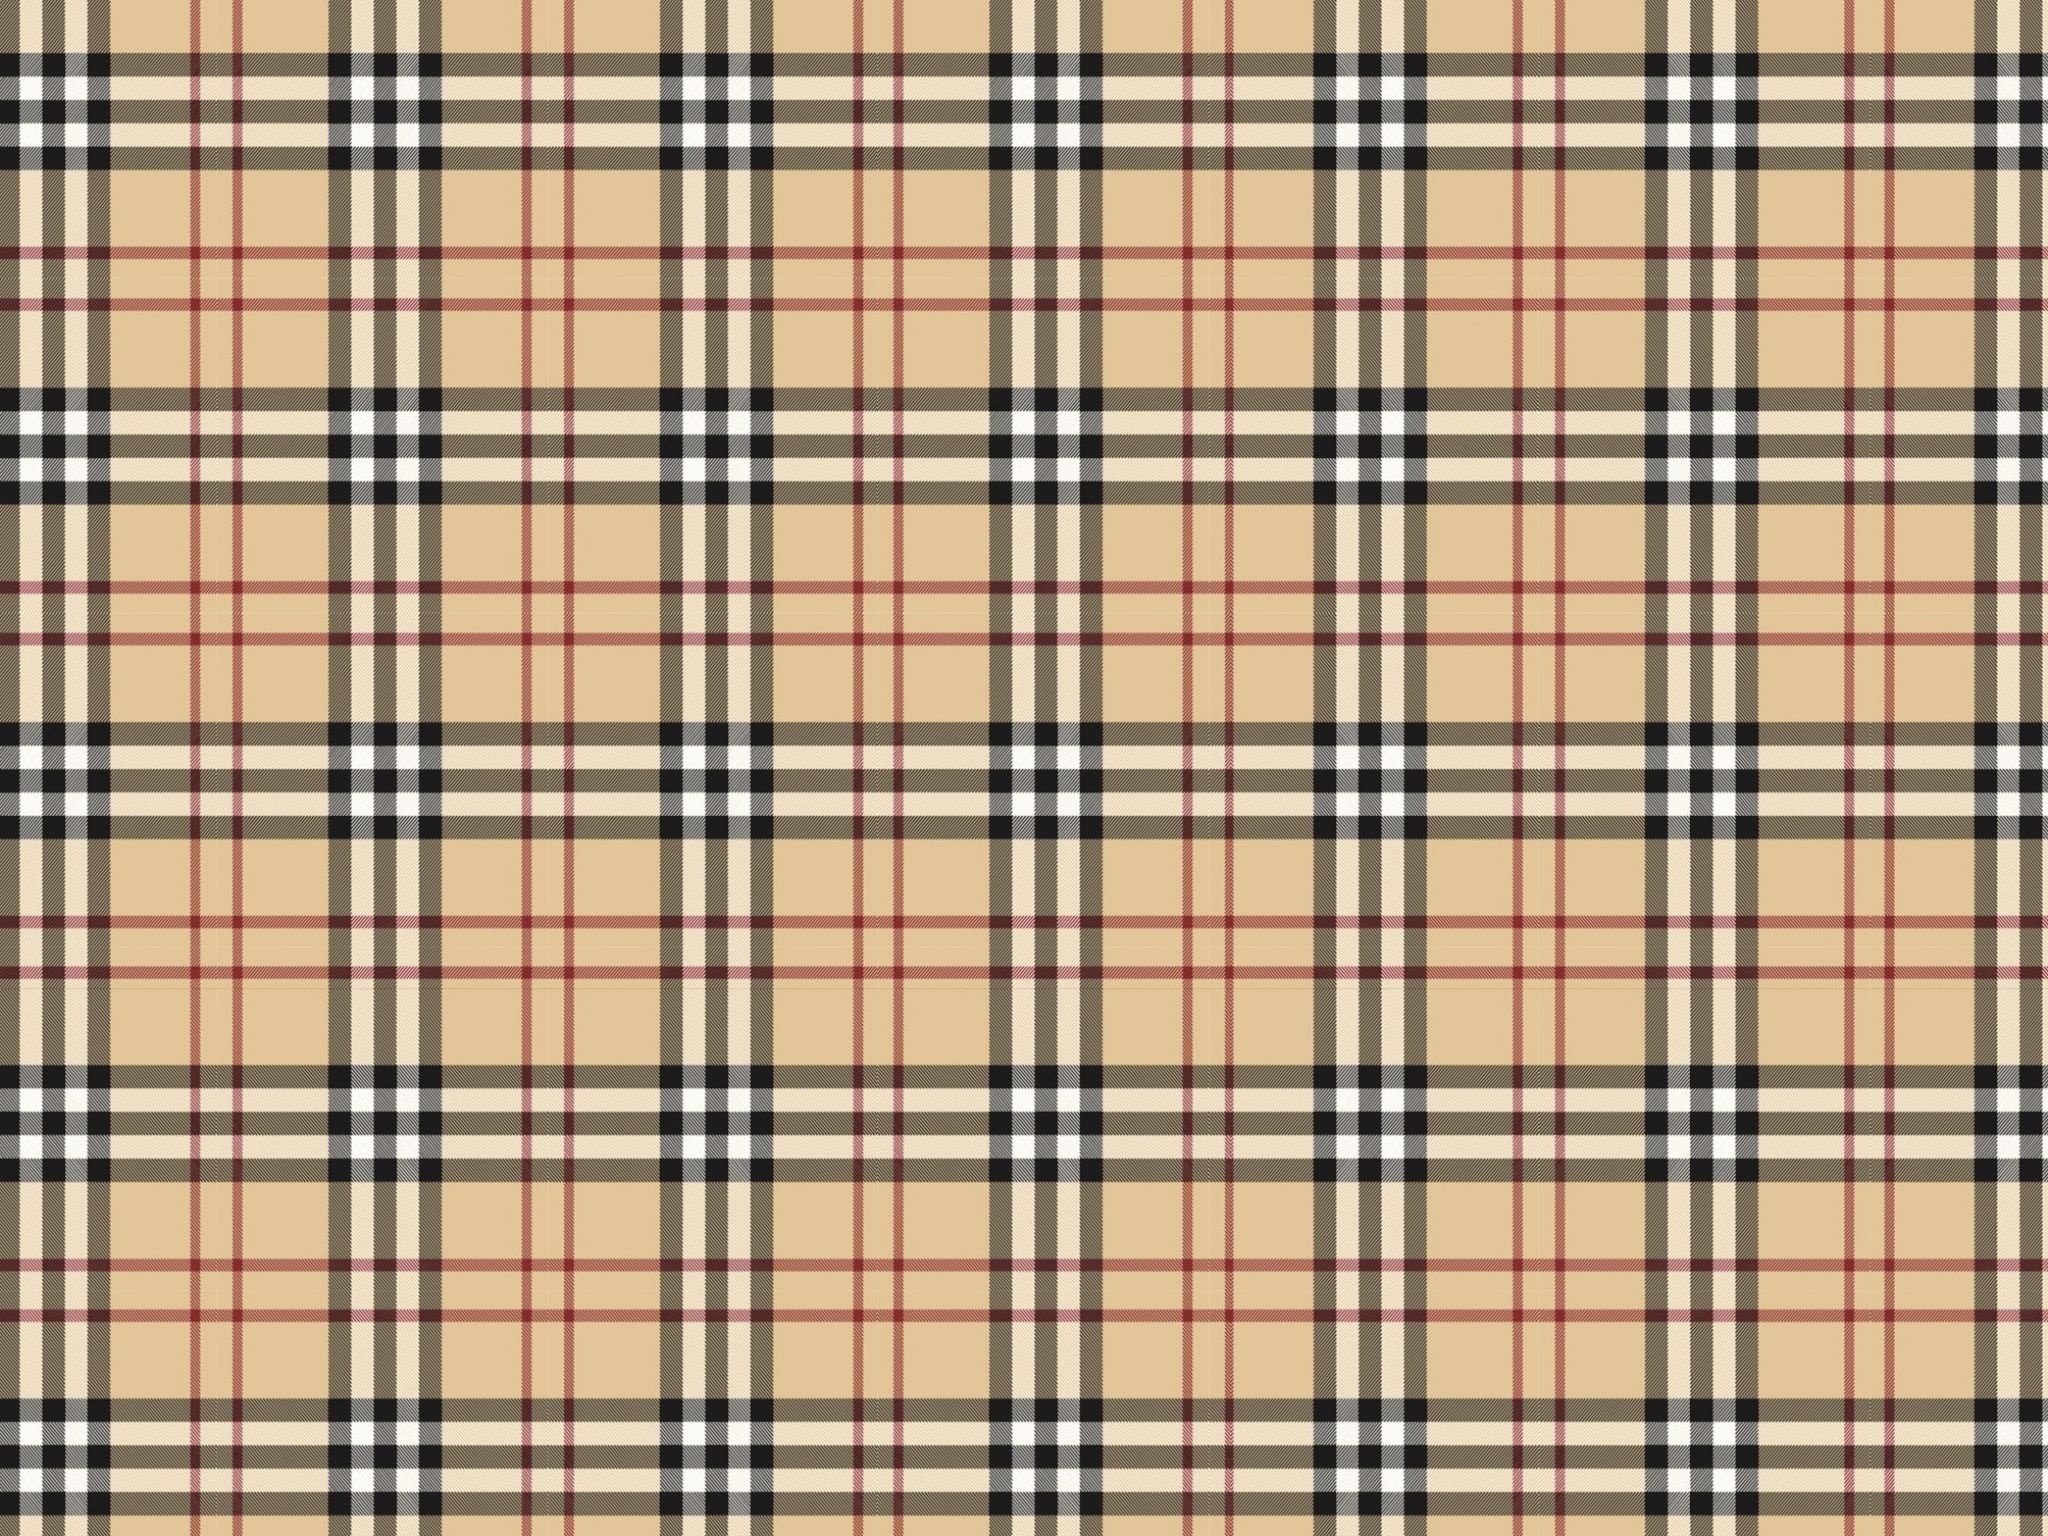 Burberry: The luxury fashion house based in London, The most iconic plaid. 2050x1540 HD Wallpaper.